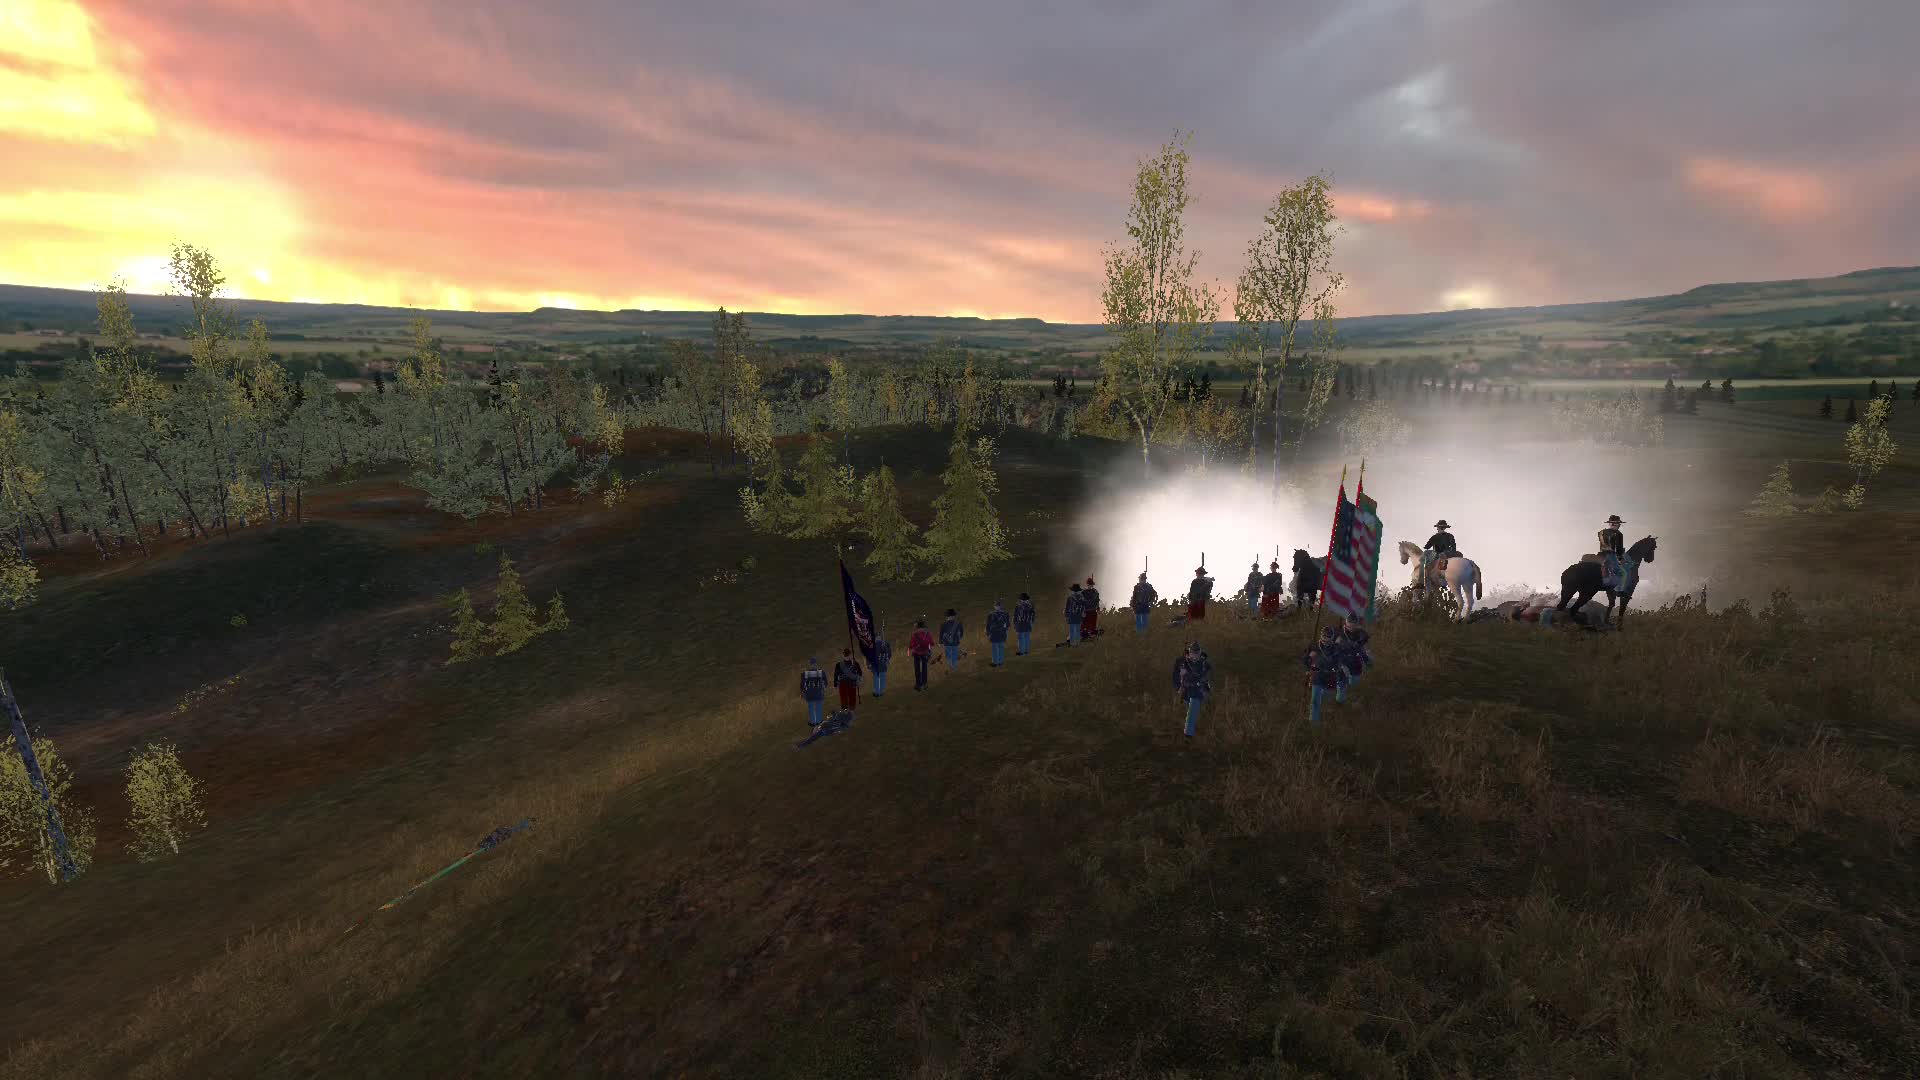 mod db mount and blade warband